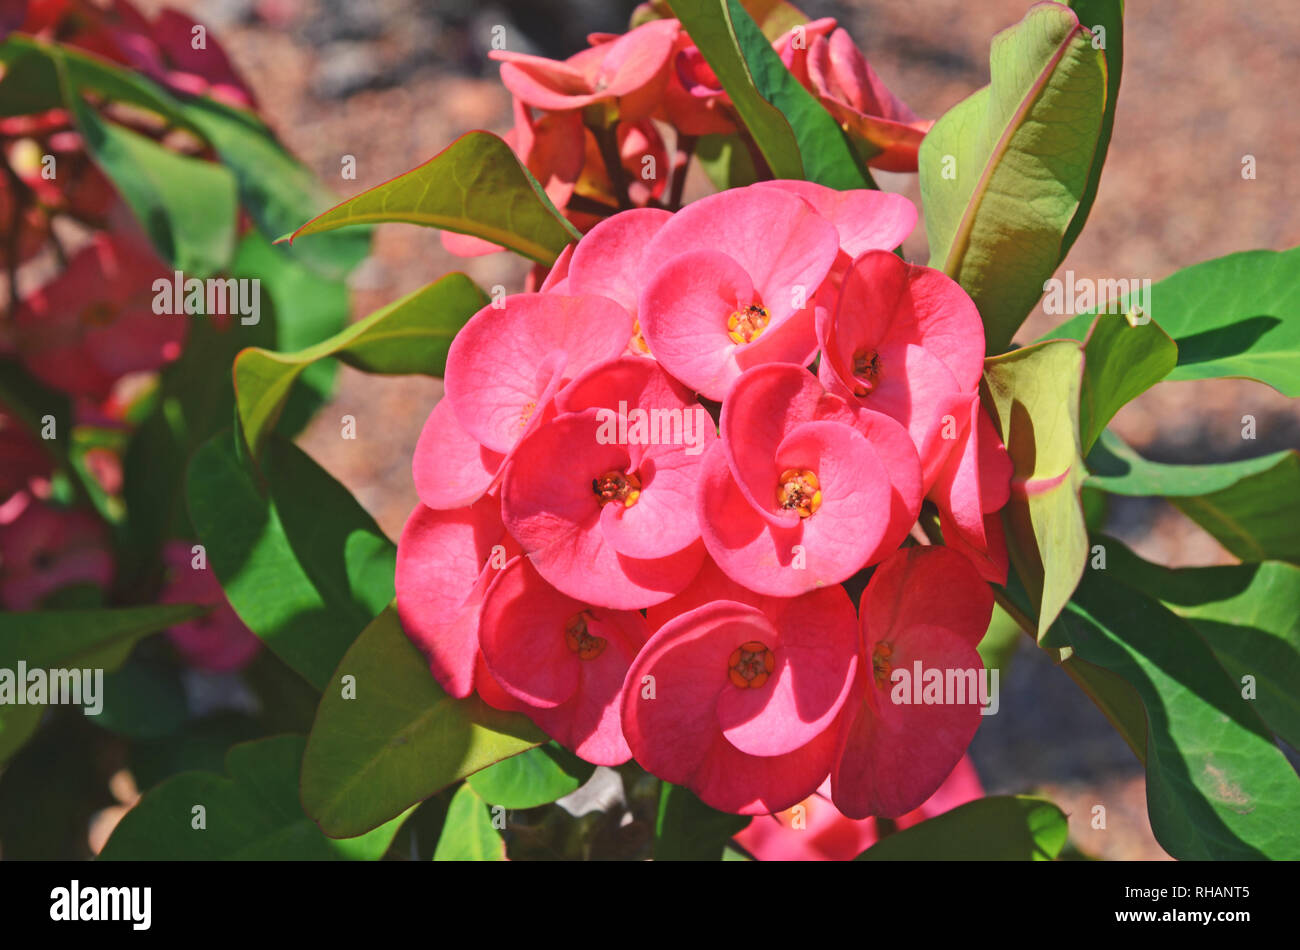 Red flowers of the Giant Crown of Thorns plant Euphorbia milii var. hislopii, family Euphorbiaceae. Hardy, drought tolerant succulent cactus species Stock Photo